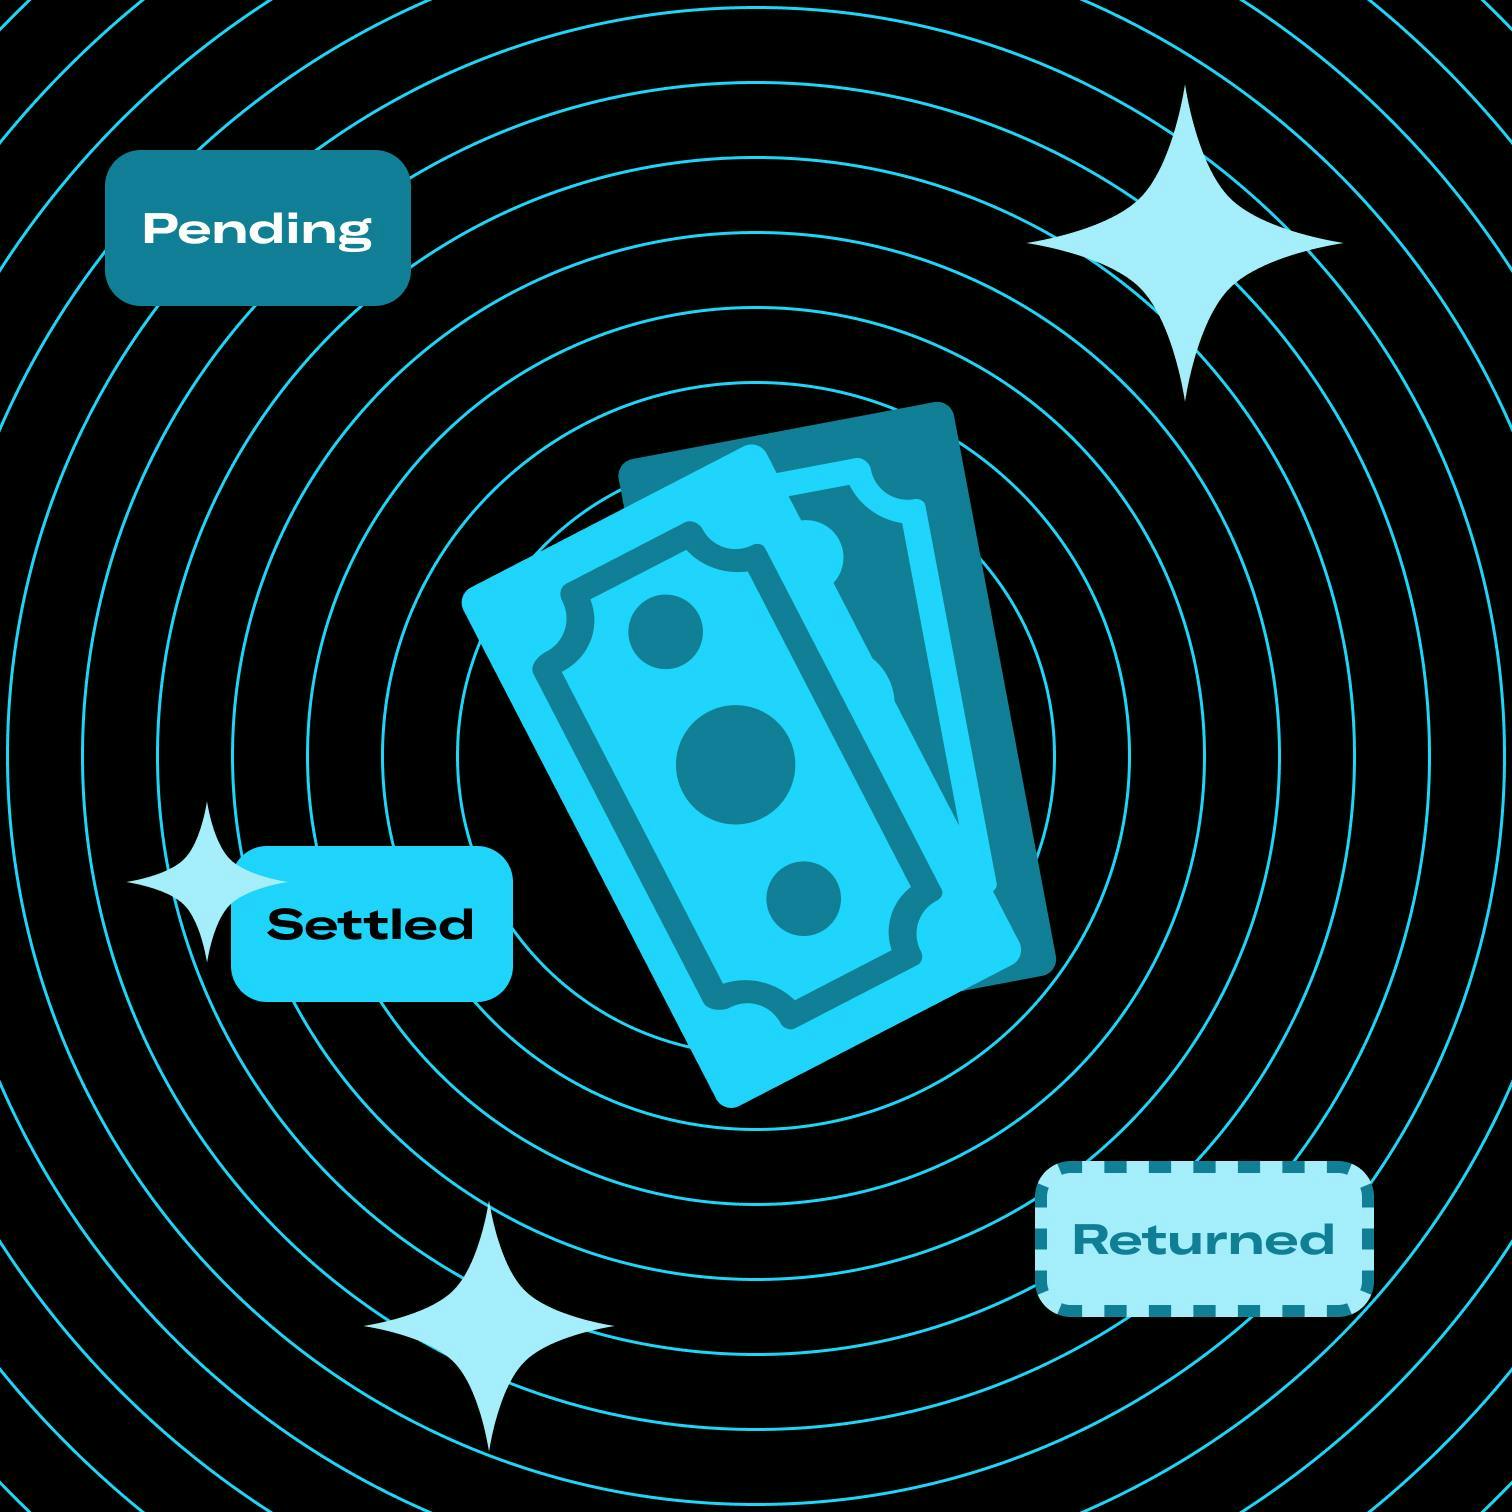 Illustration of money with shapes circling it spelling out pending, settled, returned